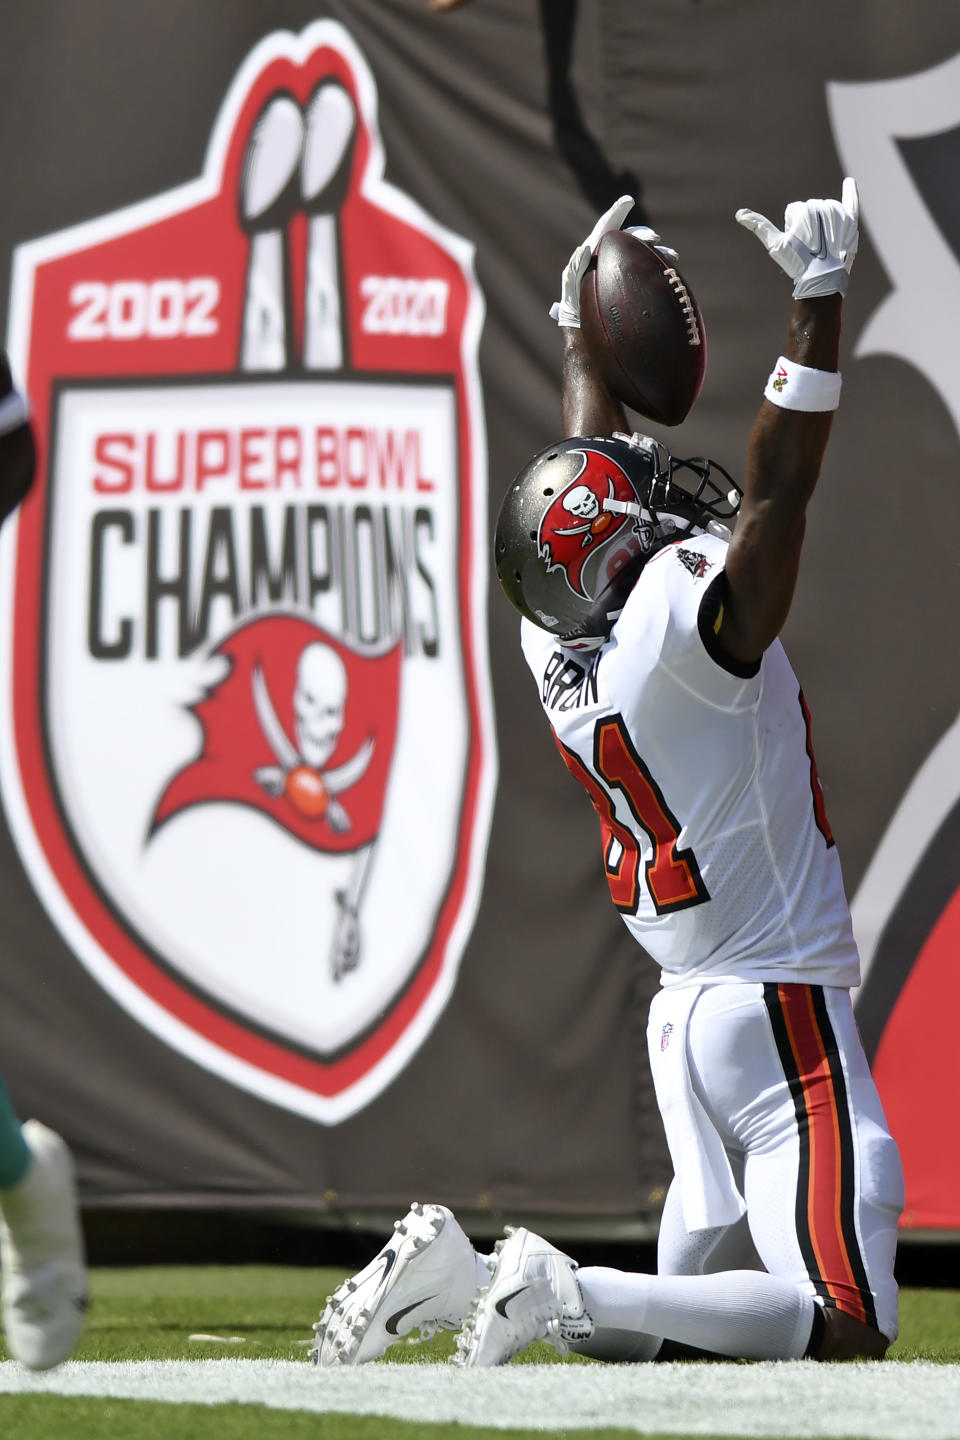 Tampa Bay Buccaneers wide receiver Antonio Brown (81) celebrates his 62-yard touchdown reception during the first half of an NFL football game against the Miami Dolphins Sunday, Oct. 10, 2021, in Tampa, Fla. (AP Photo/Jason Behnken)